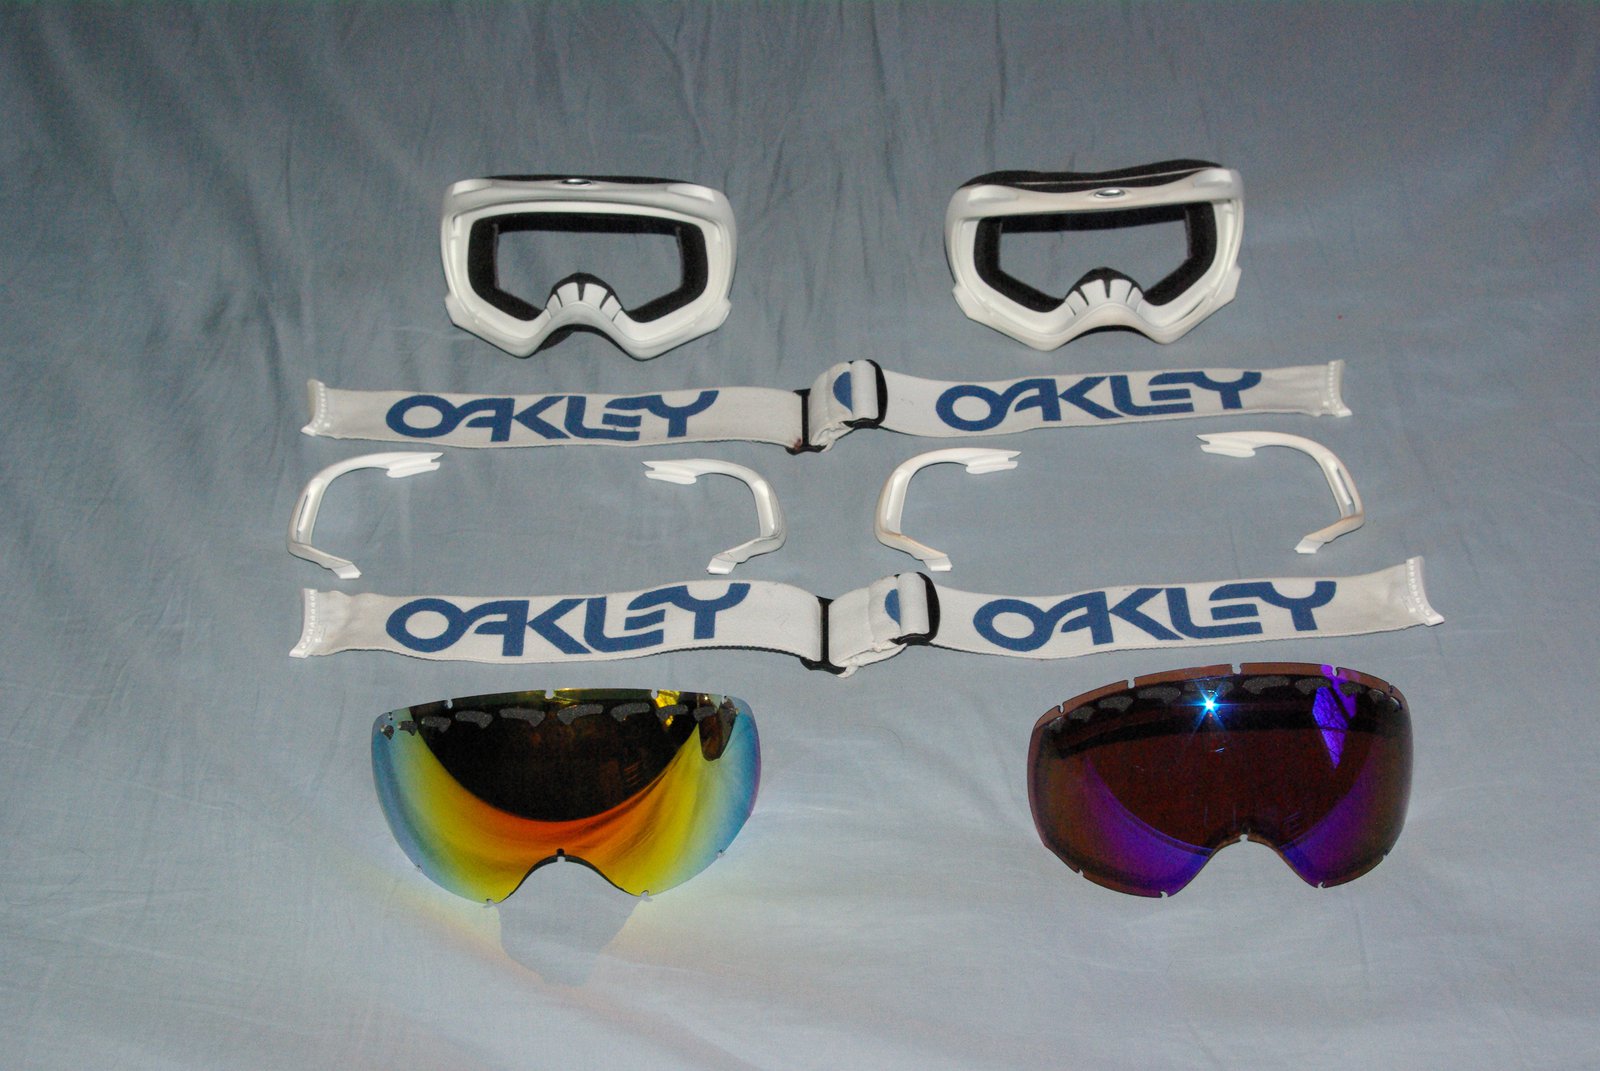 Will trade any of the parts you see here for other oakley crowbar parts